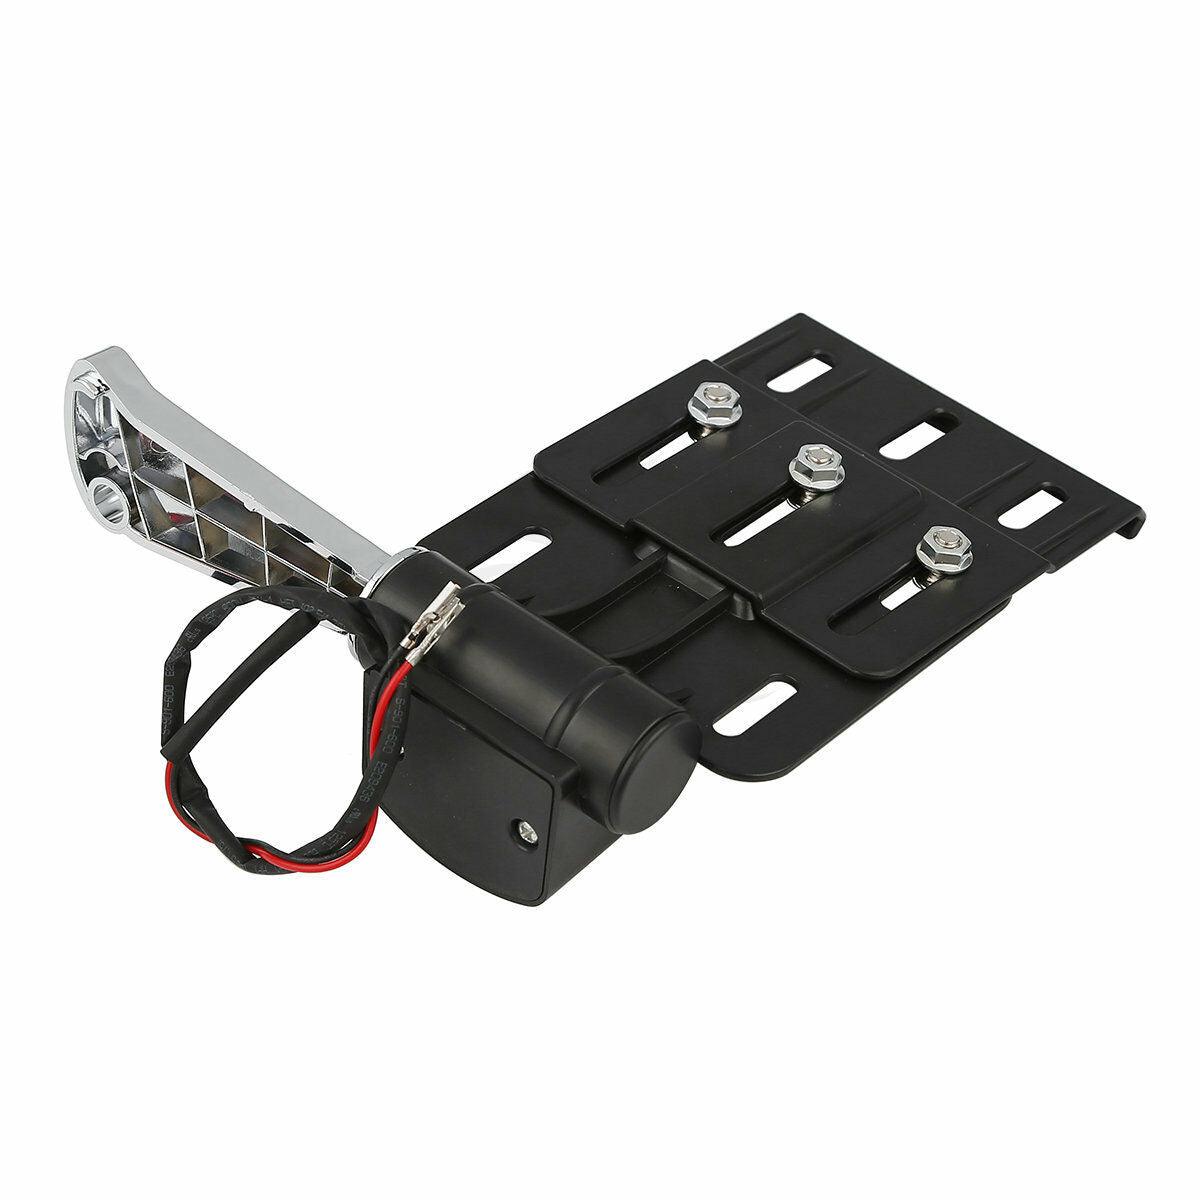 LED Light Side Mount License Plate Fit For Harley Sportster XL 1200 883 XL883N - Moto Life Products